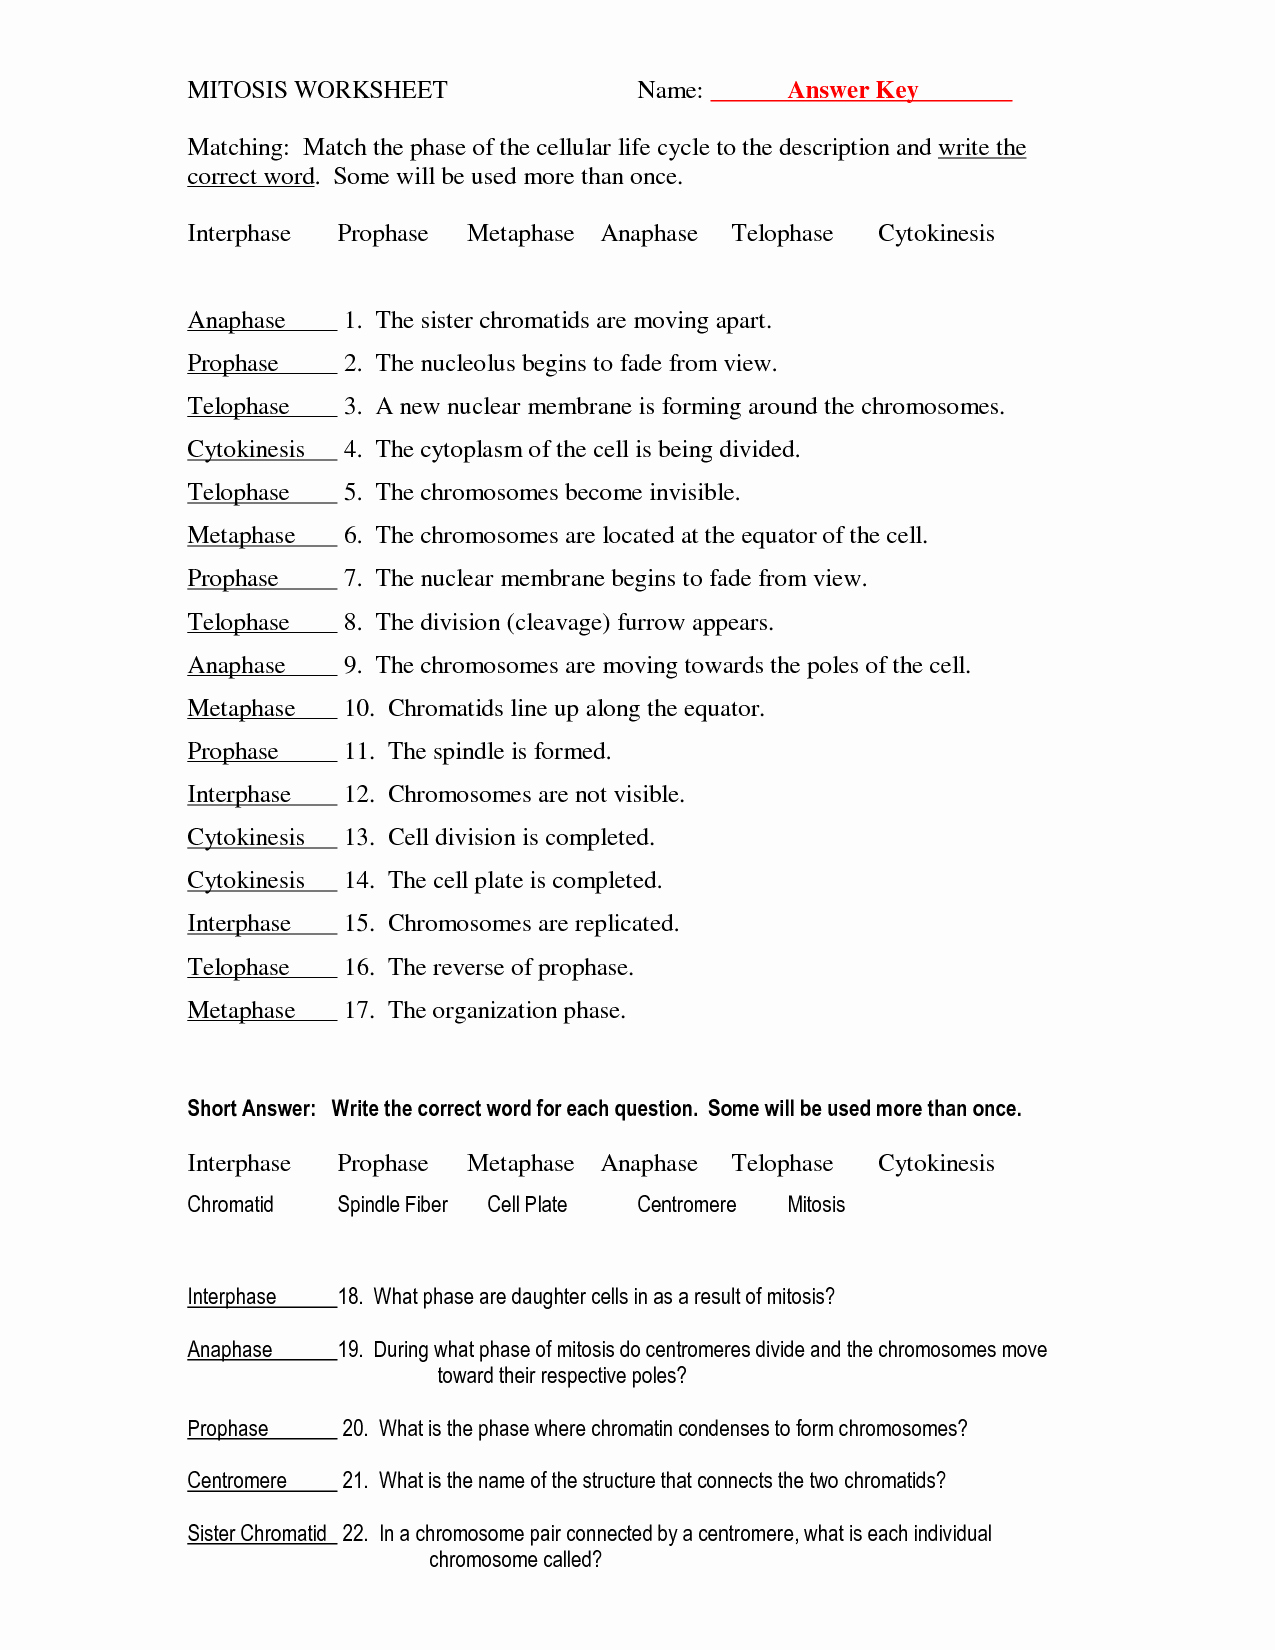 Meiosis Matching Worksheet Answer Key Lovely 13 Best Of the Cell Cycle Worksheet Study Guide